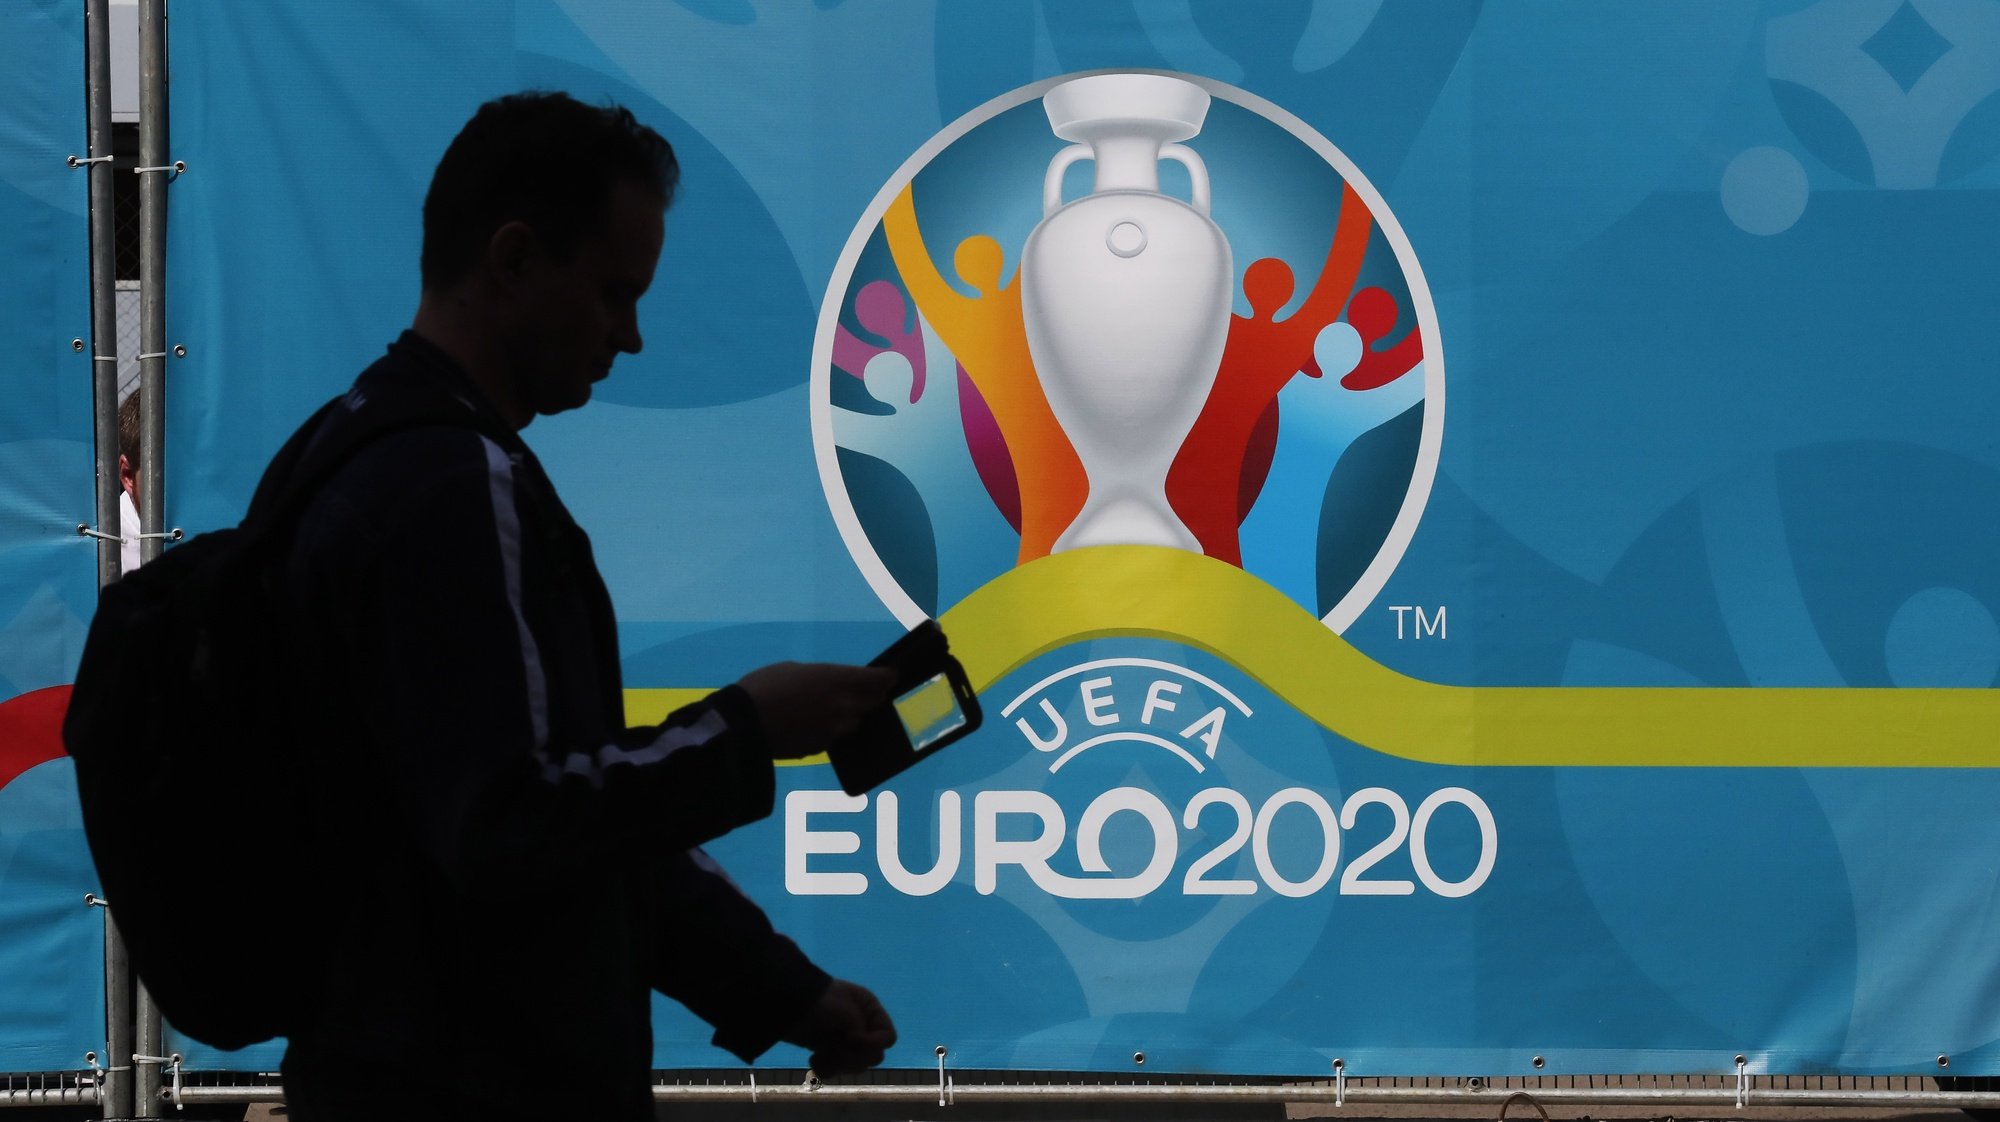 epa09251609 A man walks past a poster with the UEFA EURO 2020 logo ahead of the UEFA EURO 2020 soccer tournament in St.Petersburg, Russia, 06 June 2021. The European Championship, which was delayed from last year due to the Coronavirus pandemic features seven matches in St. Petersburg.  EPA/ANATOLY MALTSEV